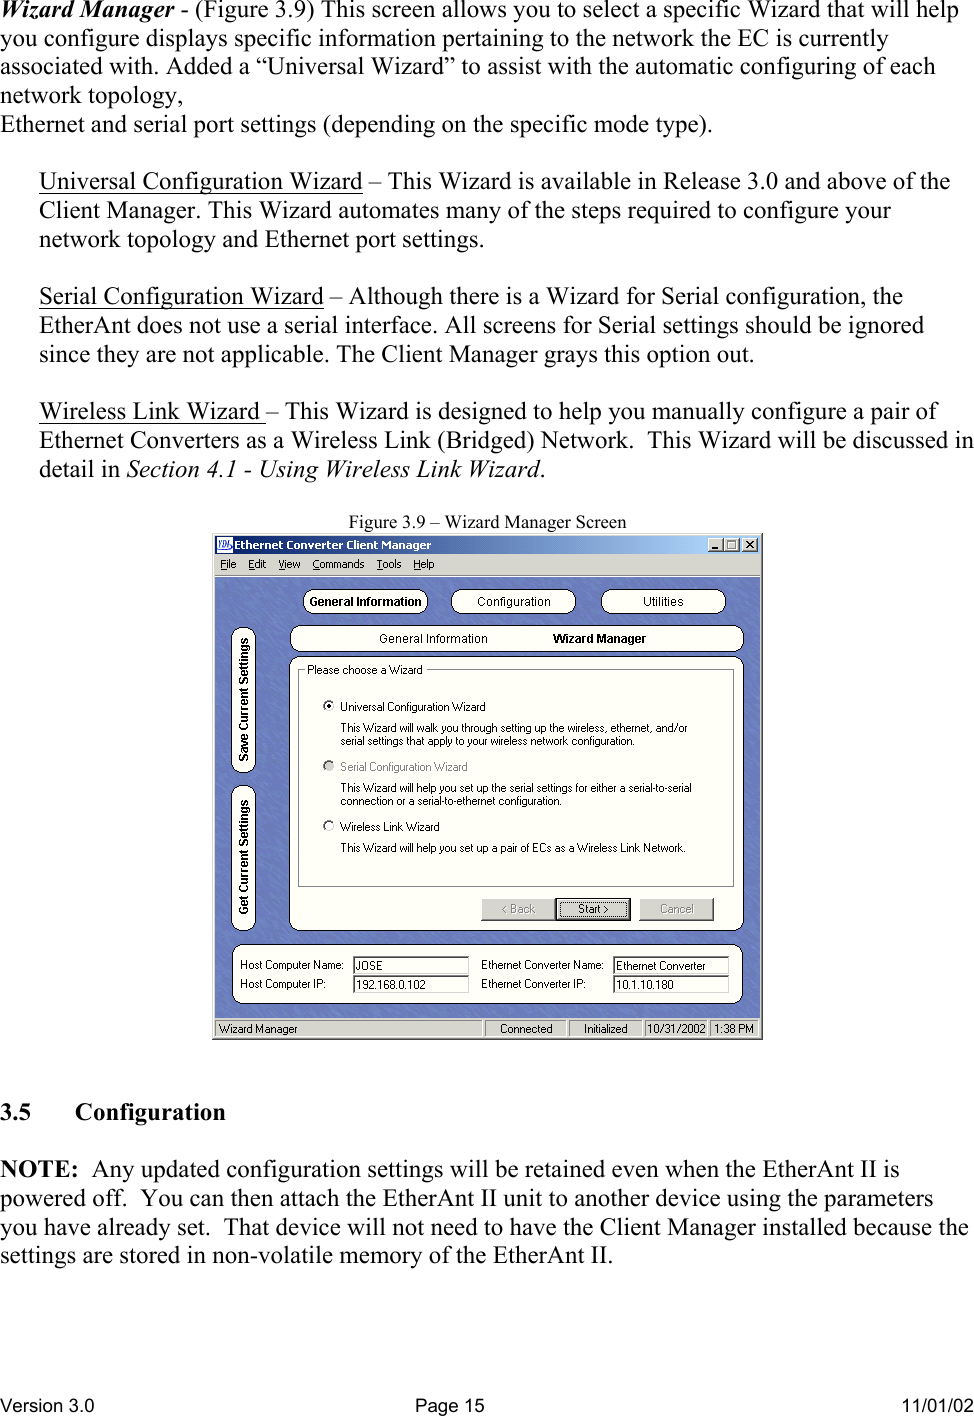 Version 3.0  Page 15  11/01/02  Wizard Manager - (Figure 3.9) This screen allows you to select a specific Wizard that will help you configure displays specific information pertaining to the network the EC is currently associated with. Added a “Universal Wizard” to assist with the automatic configuring of each network topology, Ethernet and serial port settings (depending on the specific mode type).  Universal Configuration Wizard – This Wizard is available in Release 3.0 and above of the Client Manager. This Wizard automates many of the steps required to configure your network topology and Ethernet port settings.  Serial Configuration Wizard – Although there is a Wizard for Serial configuration, the EtherAnt does not use a serial interface. All screens for Serial settings should be ignored since they are not applicable. The Client Manager grays this option out.  Wireless Link Wizard – This Wizard is designed to help you manually configure a pair of Ethernet Converters as a Wireless Link (Bridged) Network.  This Wizard will be discussed in detail in Section 4.1 - Using Wireless Link Wizard.   Figure 3.9 – Wizard Manager Screen    3.5 Configuration  NOTE:  Any updated configuration settings will be retained even when the EtherAnt II is powered off.  You can then attach the EtherAnt II unit to another device using the parameters you have already set.  That device will not need to have the Client Manager installed because the settings are stored in non-volatile memory of the EtherAnt II.  